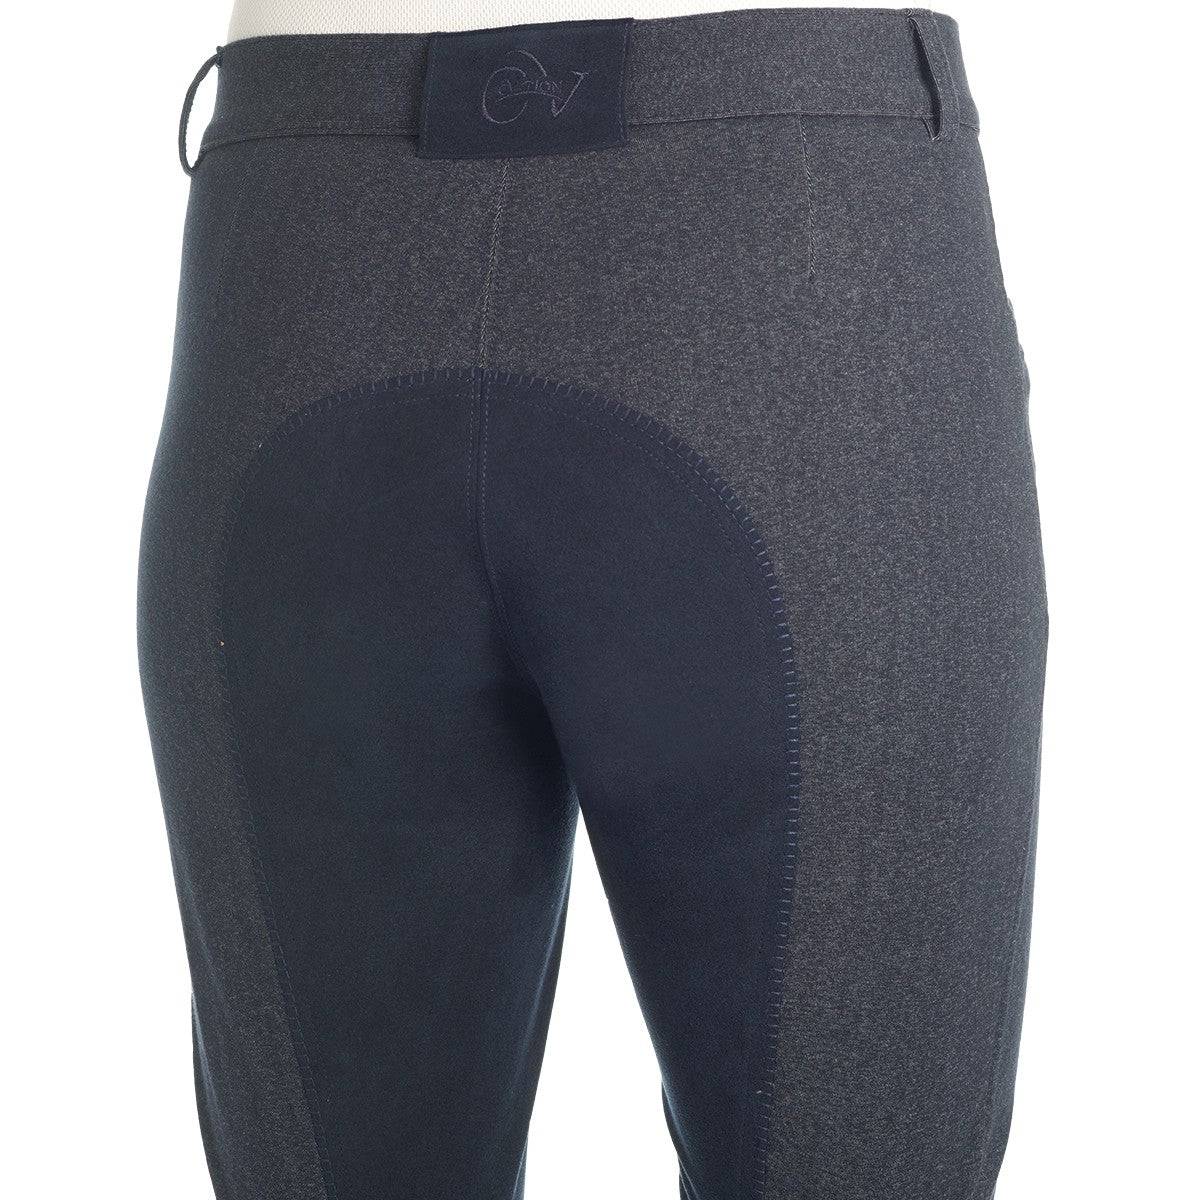 Ovation® Marilyn SoftFLEX Shapely Full Seat Breeches- Ladies' - Equine Exchange Tack Shop